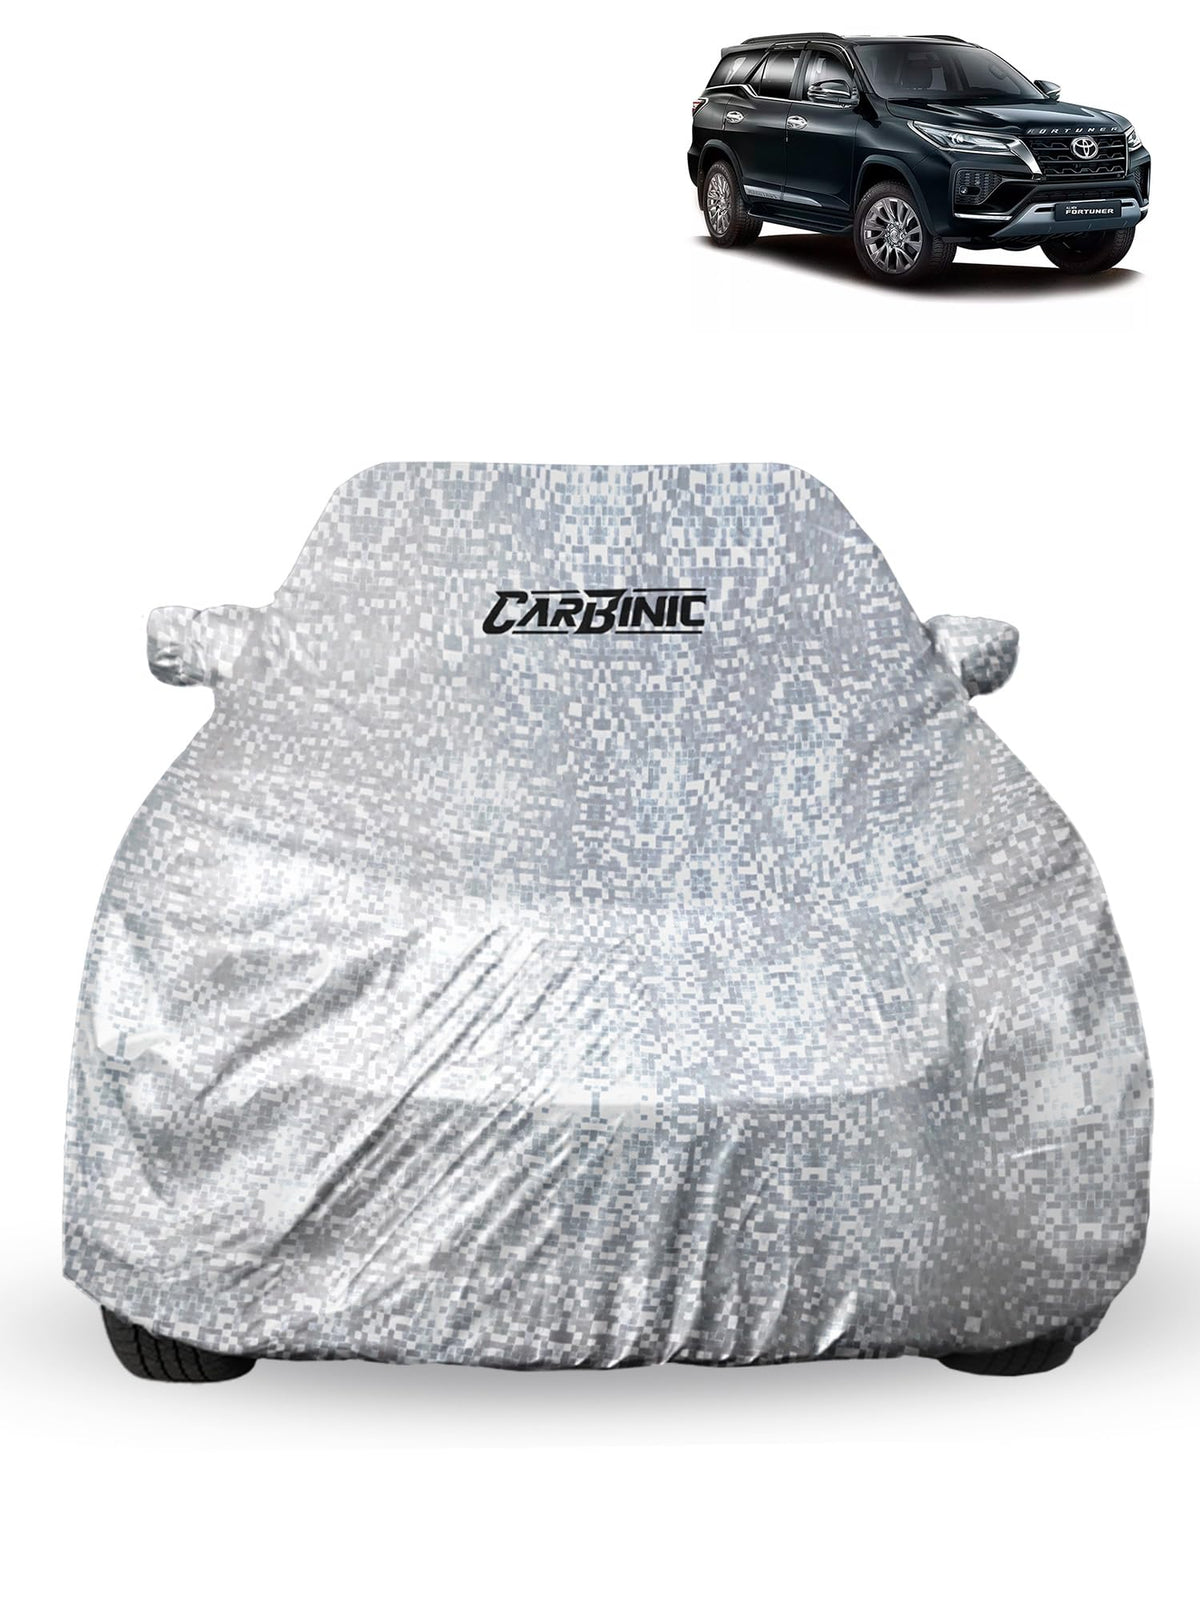 CARBINIC Car Cover for Toyota Fortuner2022 Waterproof (Tested) and Dustproof Custom Fit UV Heat Resistant Outdoor Protection with Triple Stitched Fully Elastic Surface | Silver with Pockets